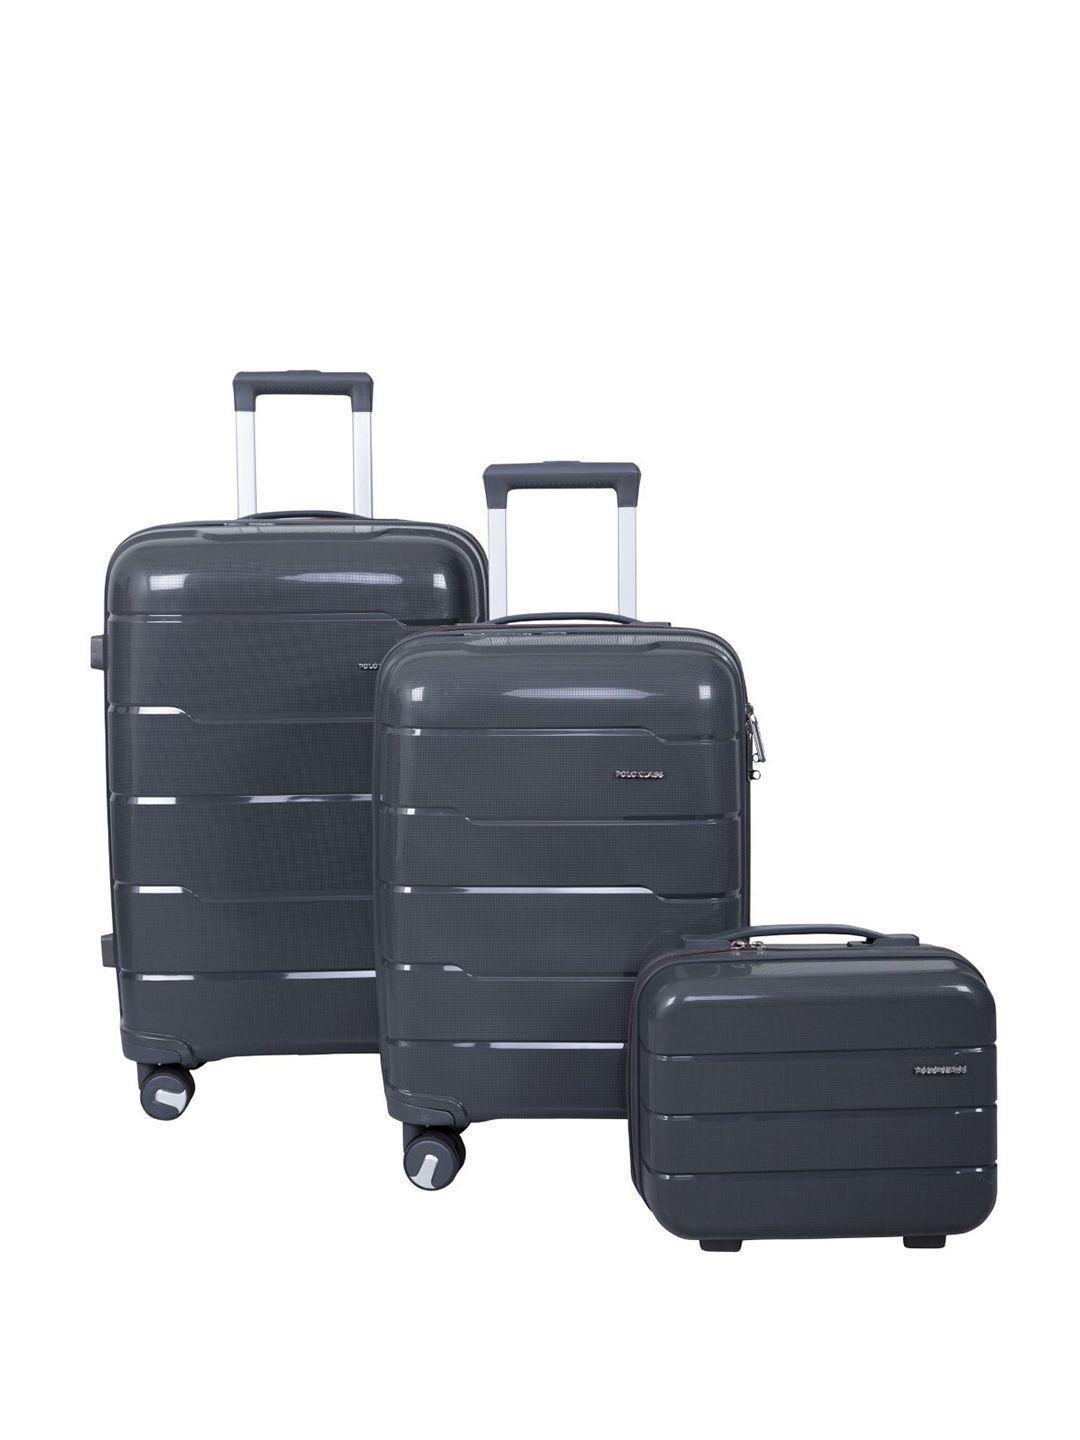 polo class set of 2 textured hard-sided trolley suitcases with 1pc vanity bag-50 l